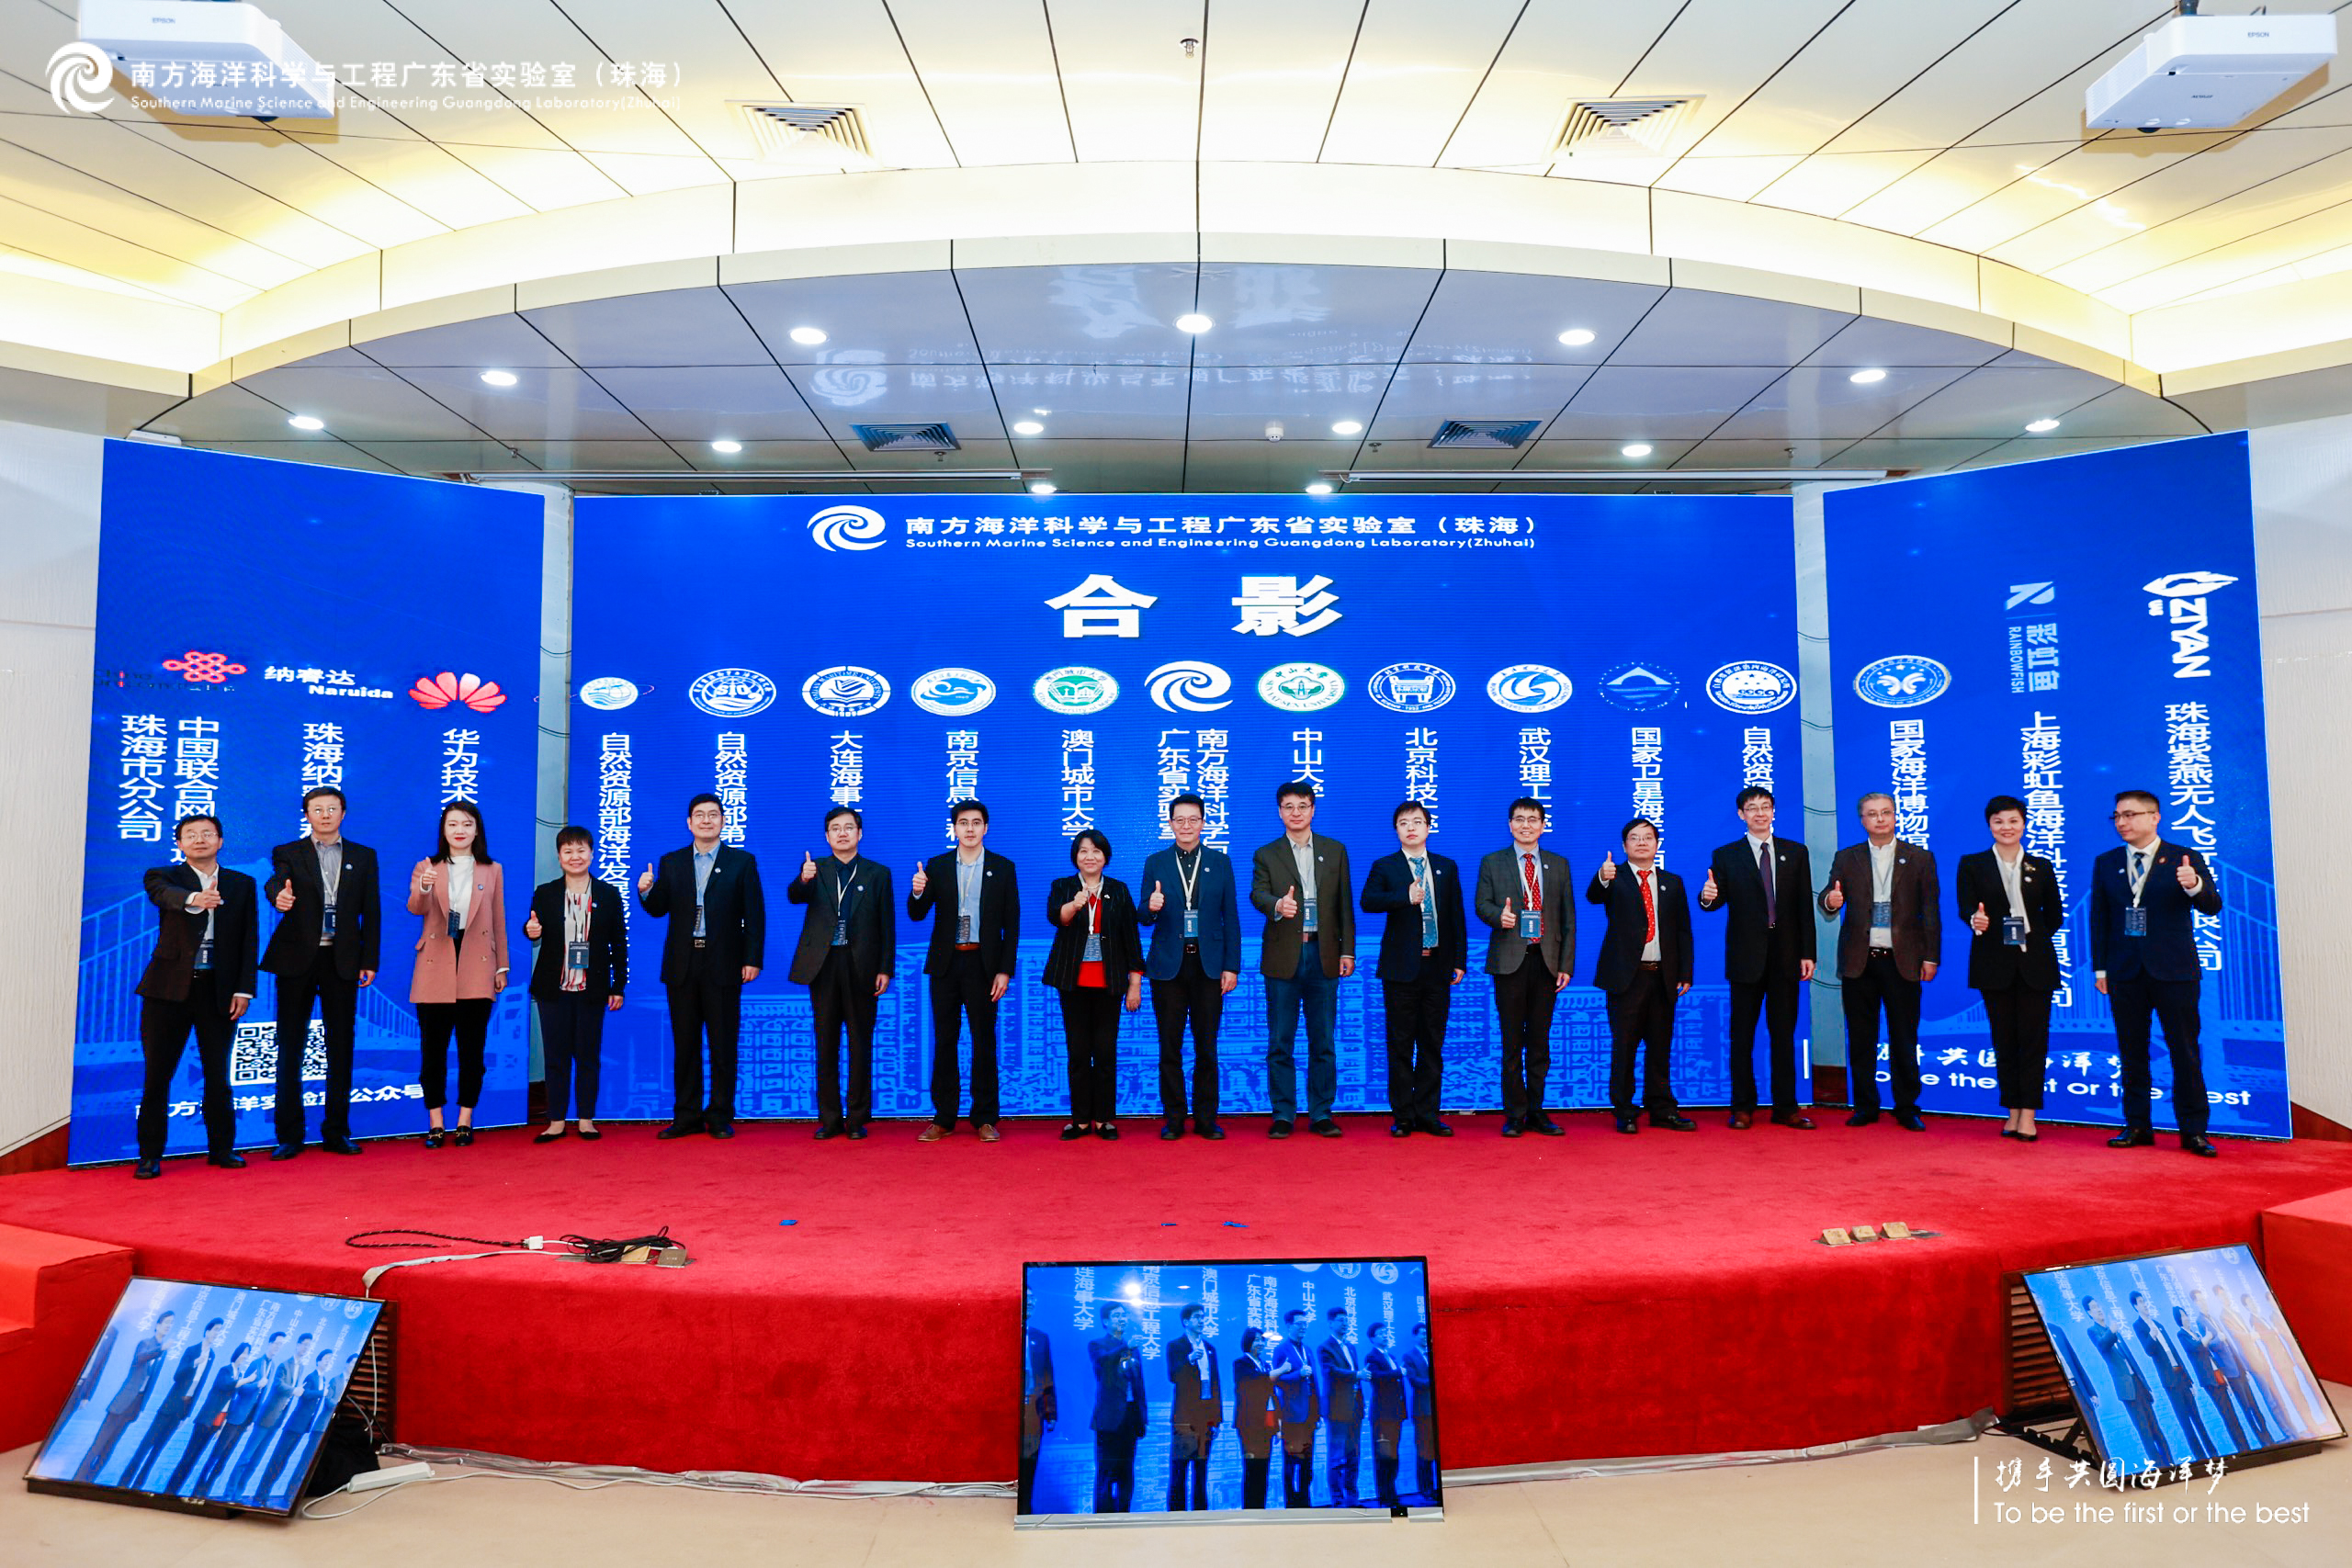 Exchange symposium and signing ceremony for the third batch jointly development of the Southern Marine Science and Engineering Guangdong Laboratory